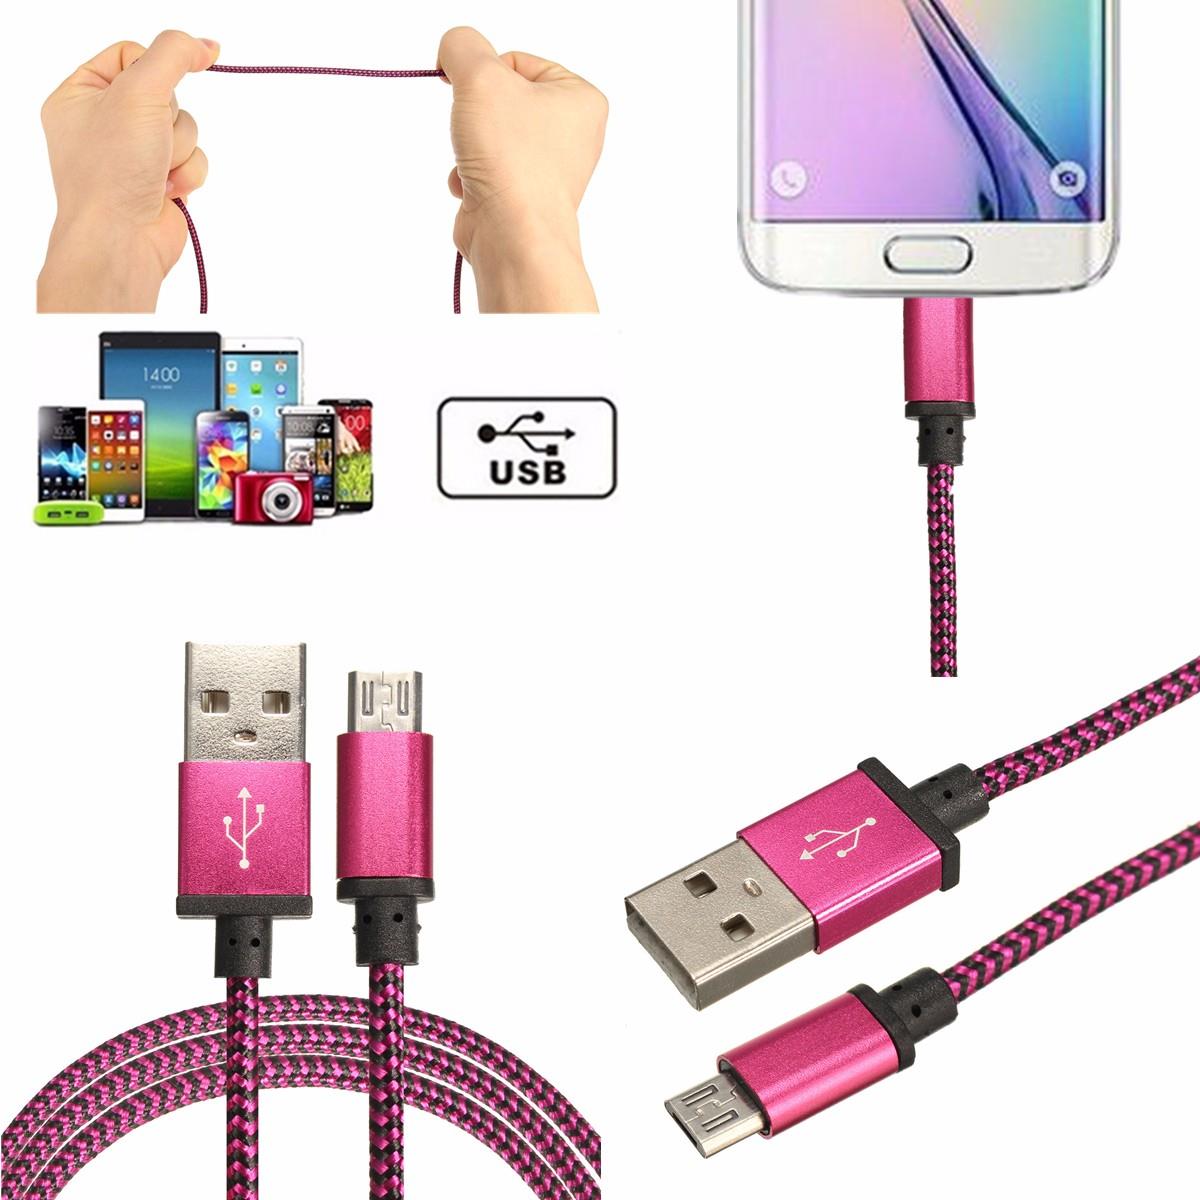 1M/3.3Ft Strong Braided Micro USB 2.0 to USB Male Data Sync Cable for Micro 5pin Phone Tablet Samsung Galaxy S6 Edge/S5/S4/S3/Note4/Note3/Note 2 HTC One M9/One M8/One X / One S / LG G1 G2 G3 G4